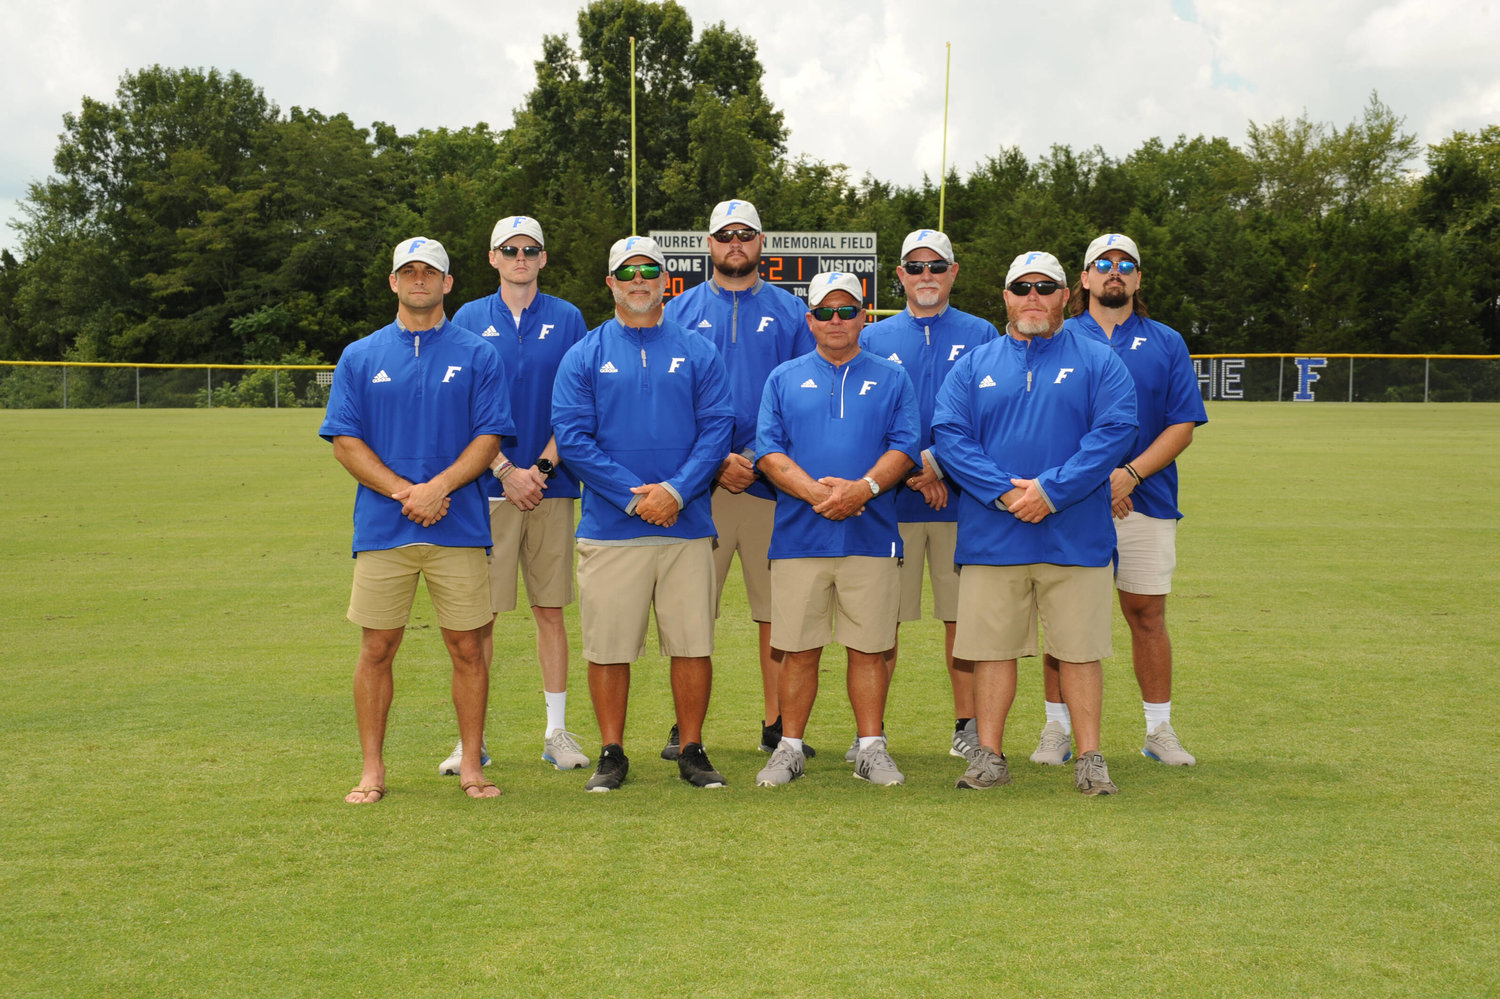 The 2020 Forrest coaching staff front row from left are, Jacob Daughrity, Kyle Stacey, Larry Chatman, and Jeremy Austin. Back row from left are, Tony Johnson, head Coach Eli Stephenson, Jason Hill, and Zach Russell.